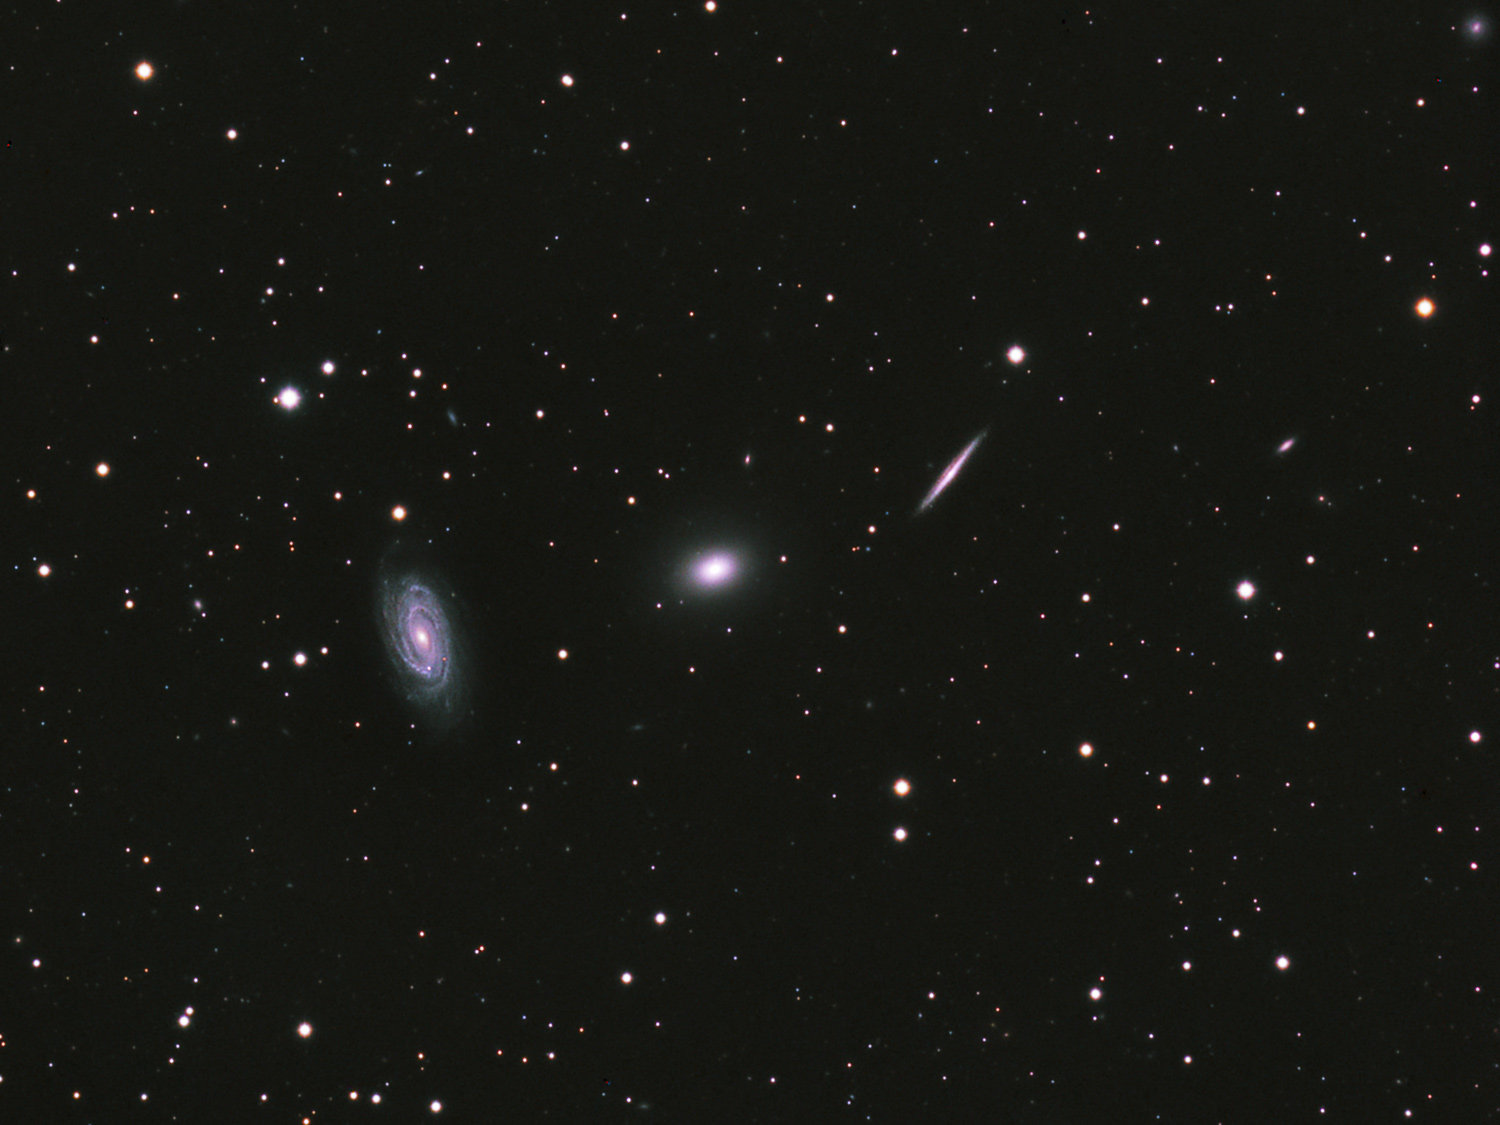 20110609_NGC5982_LRGB-PS3-V4-opt-Combine-with-stars-BSF2-Scaled.jpg